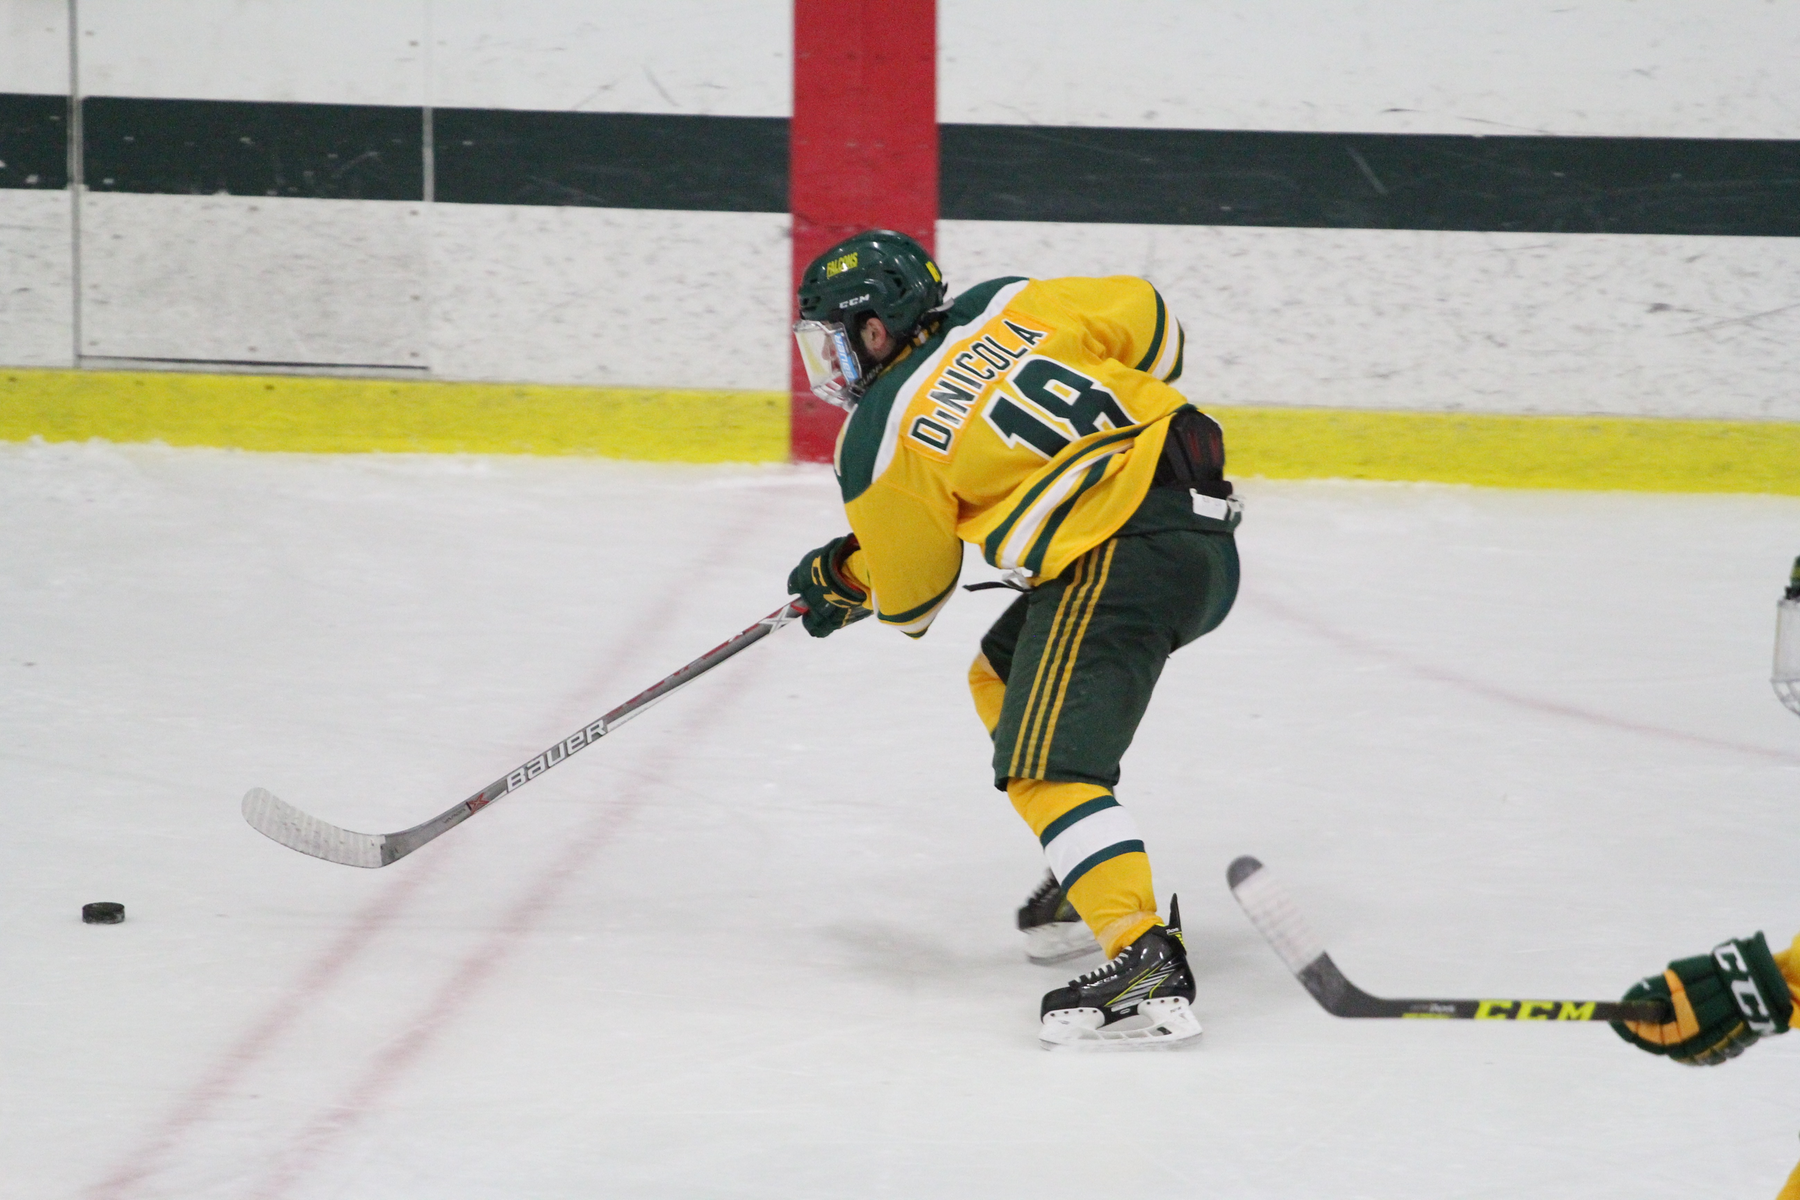 Fitchburg State Defeated By Colby, 8-3